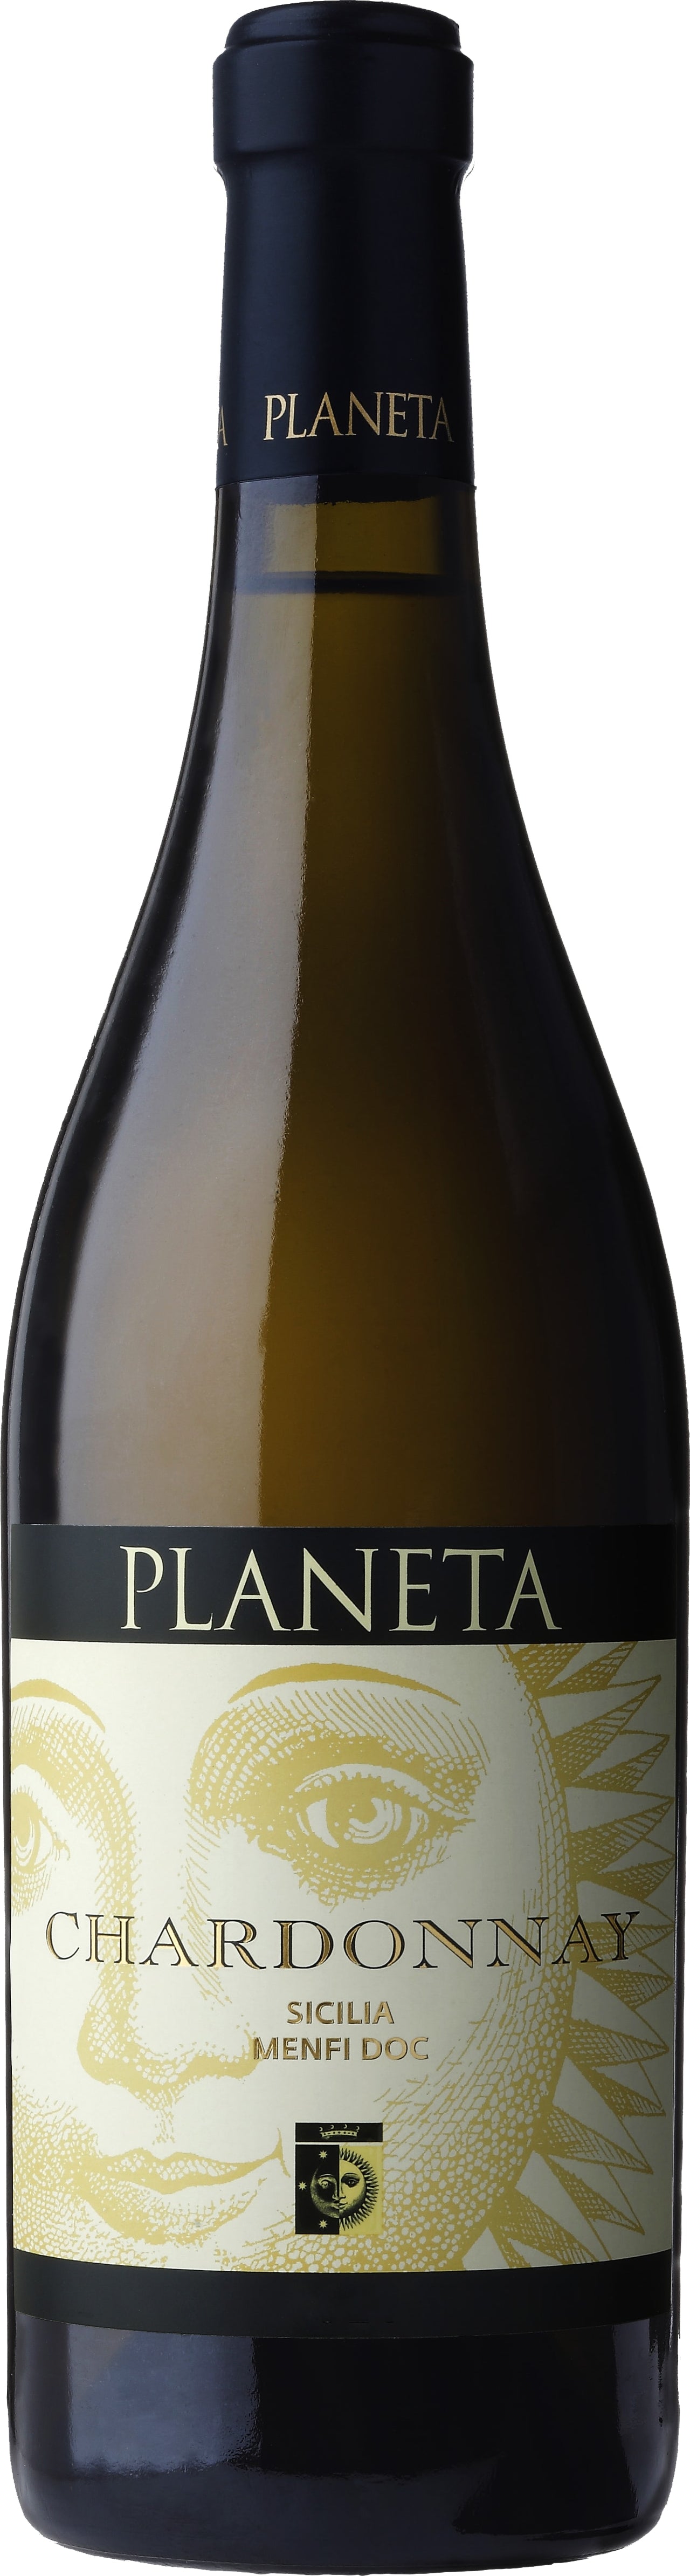 Planeta Chardonnay 2022 75cl - Buy Planeta Wines from GREAT WINES DIRECT wine shop